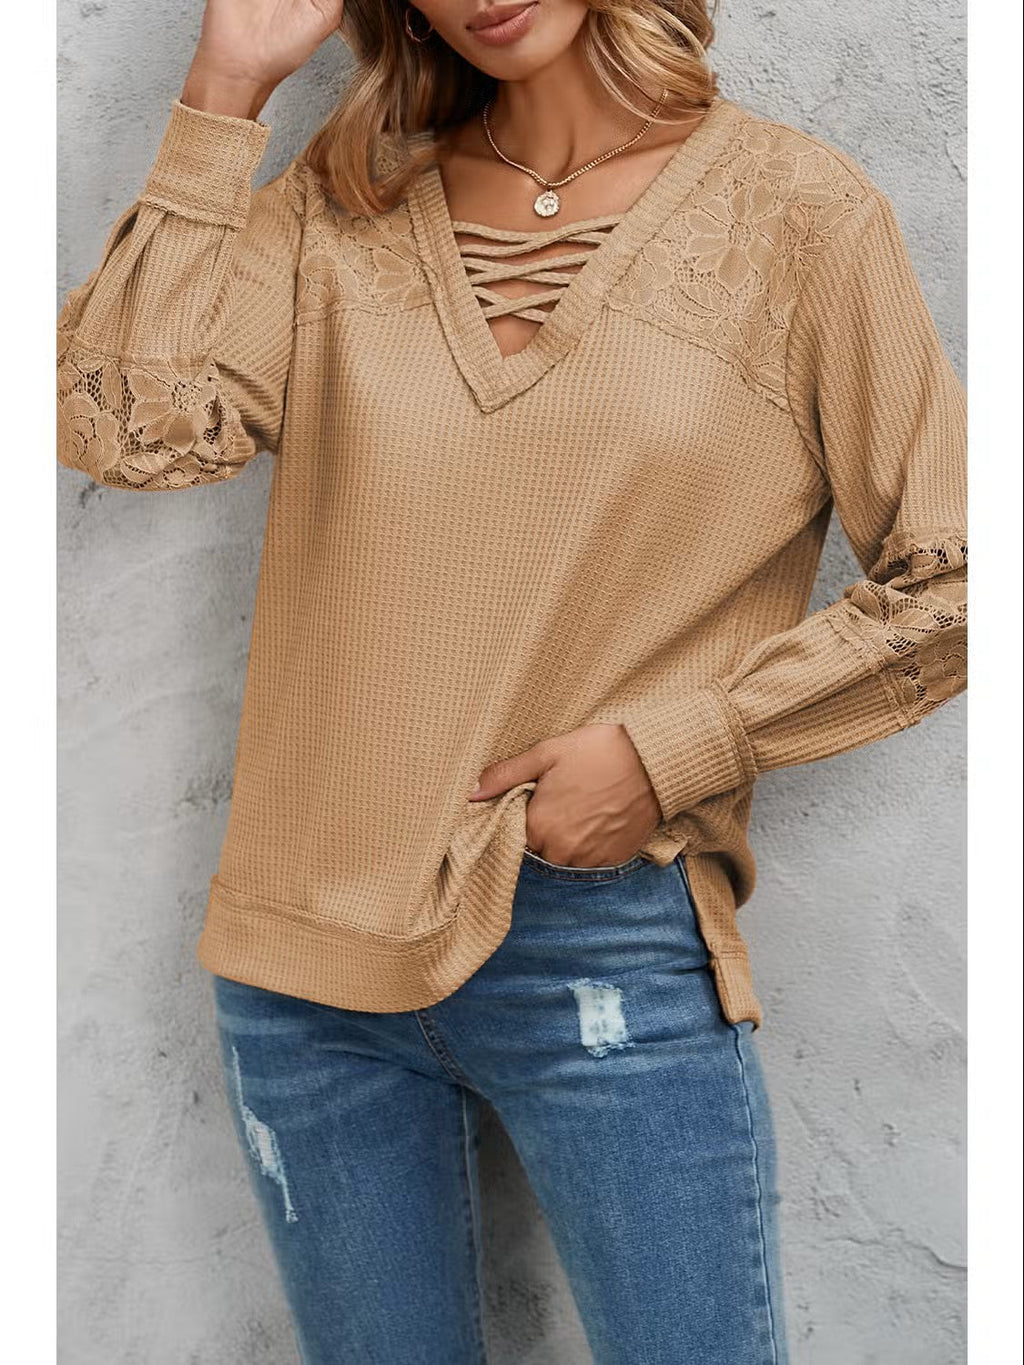 : A Heart In Motion Plus Apricot Lace Waffle Top - Catching Fireflies Boutique